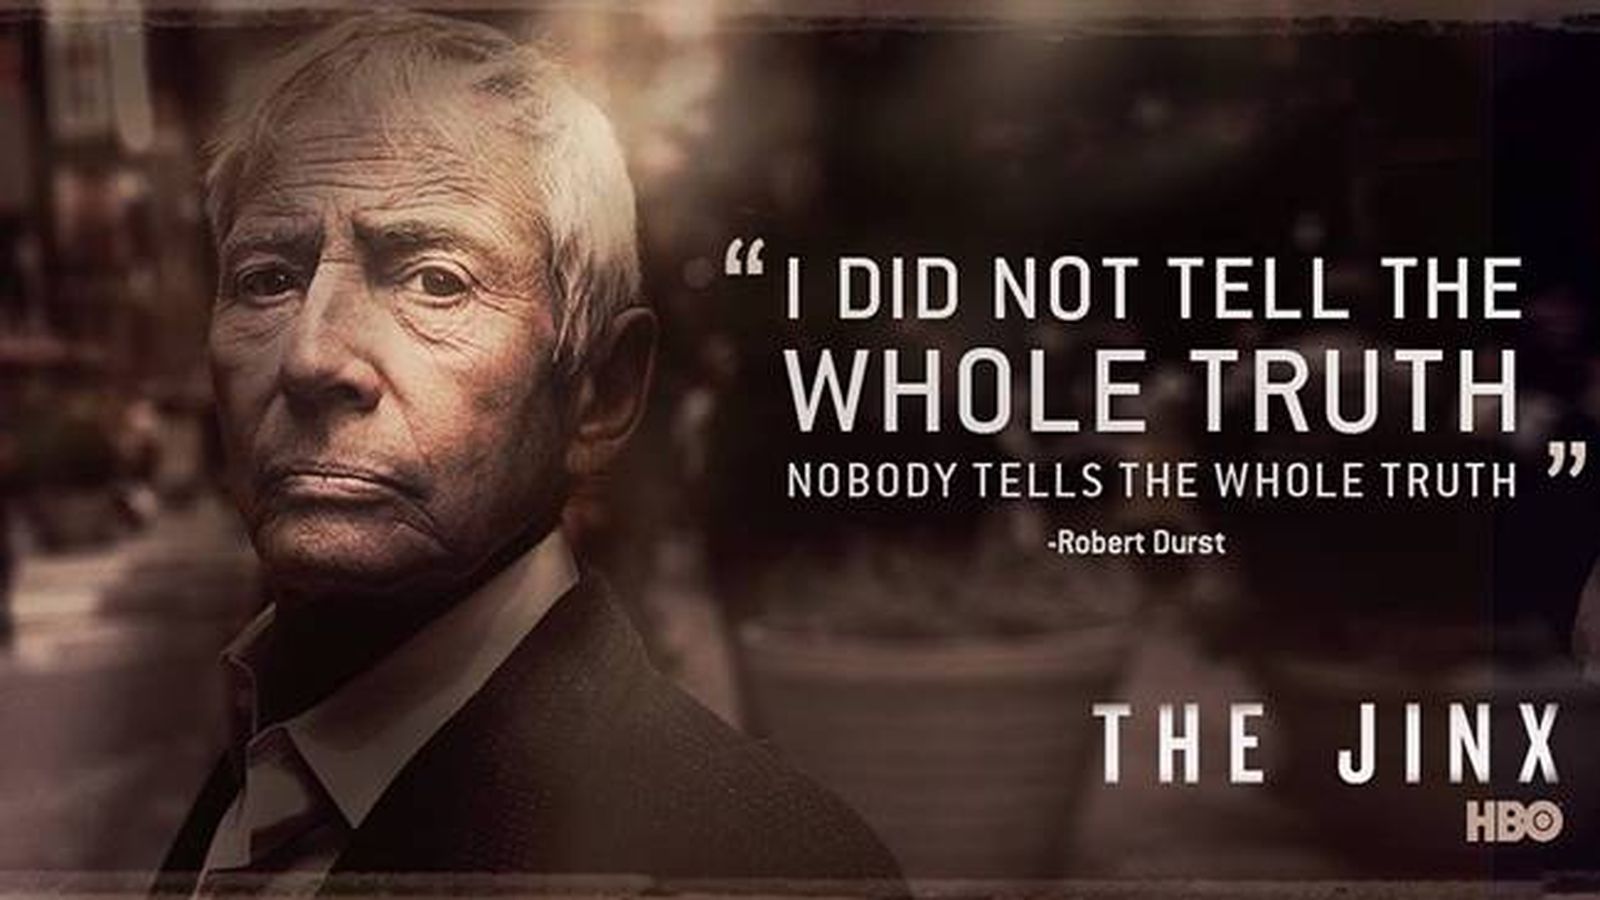 HBO Releases Official Teaser For THE JINX – PART TWO, Debuting April 21